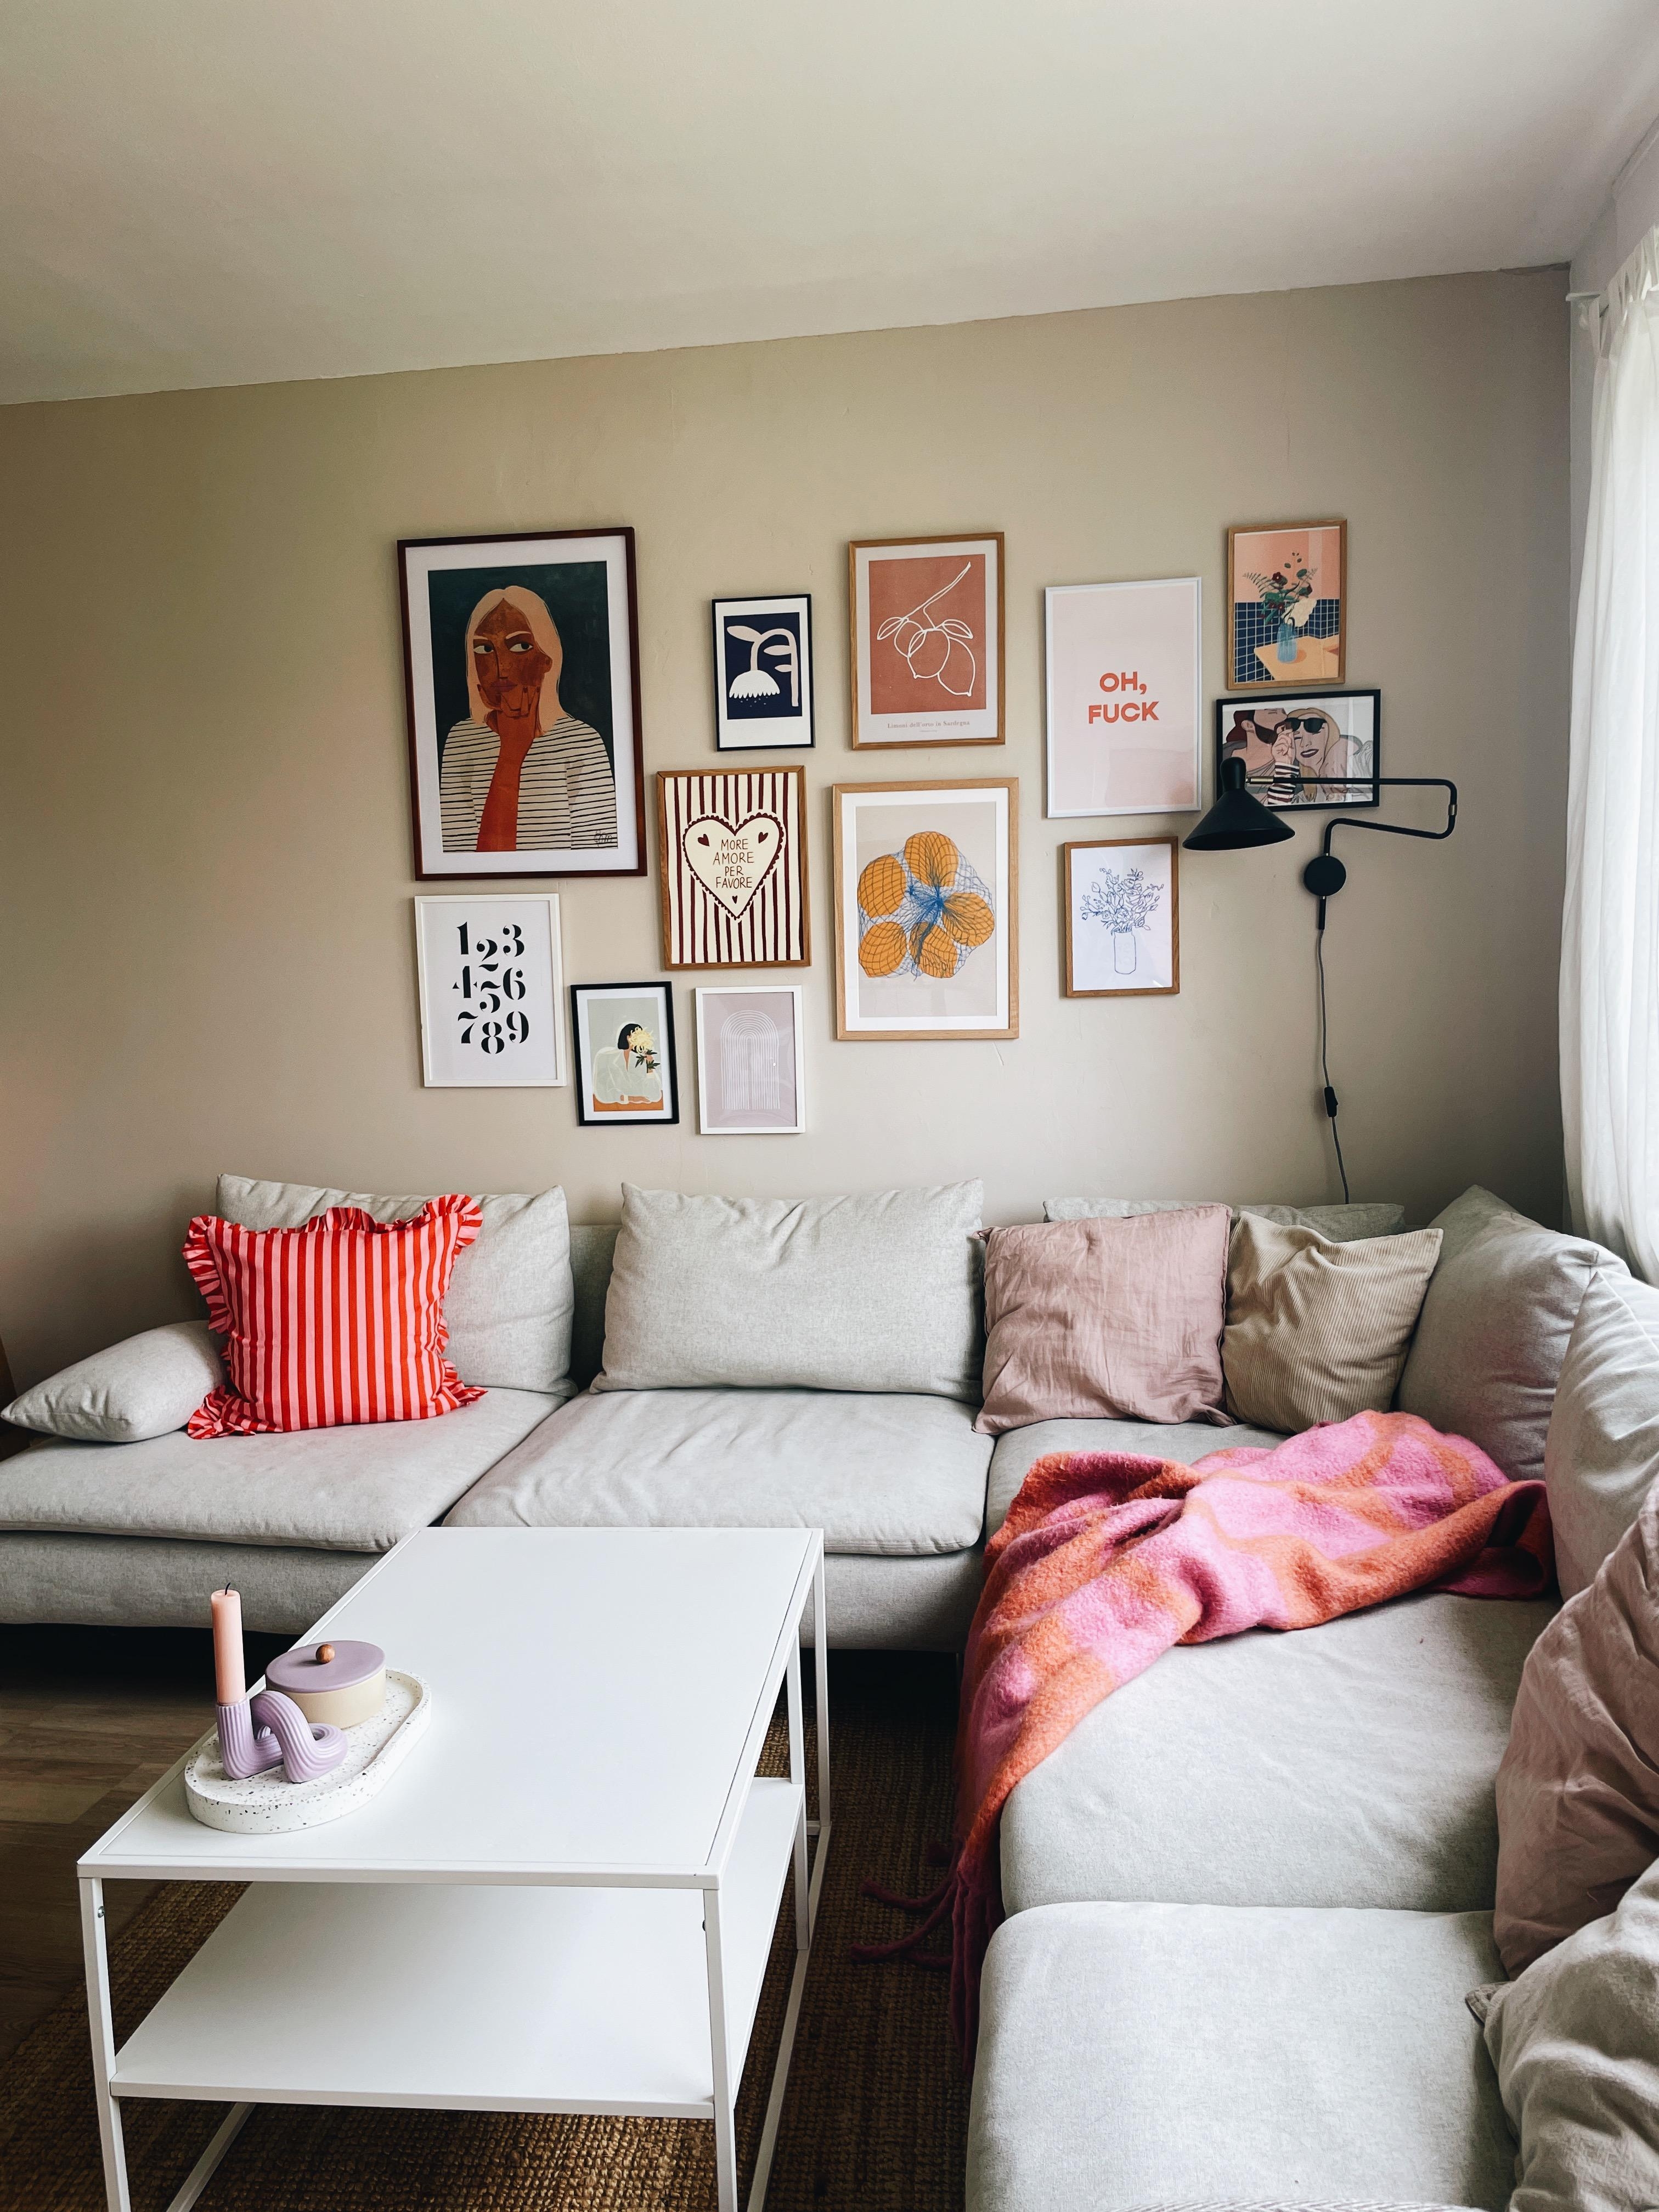 Cozy 💕
#wohnzimmer #couch #couchliebt #cozy #gallerywall #colours #farbenfroh 